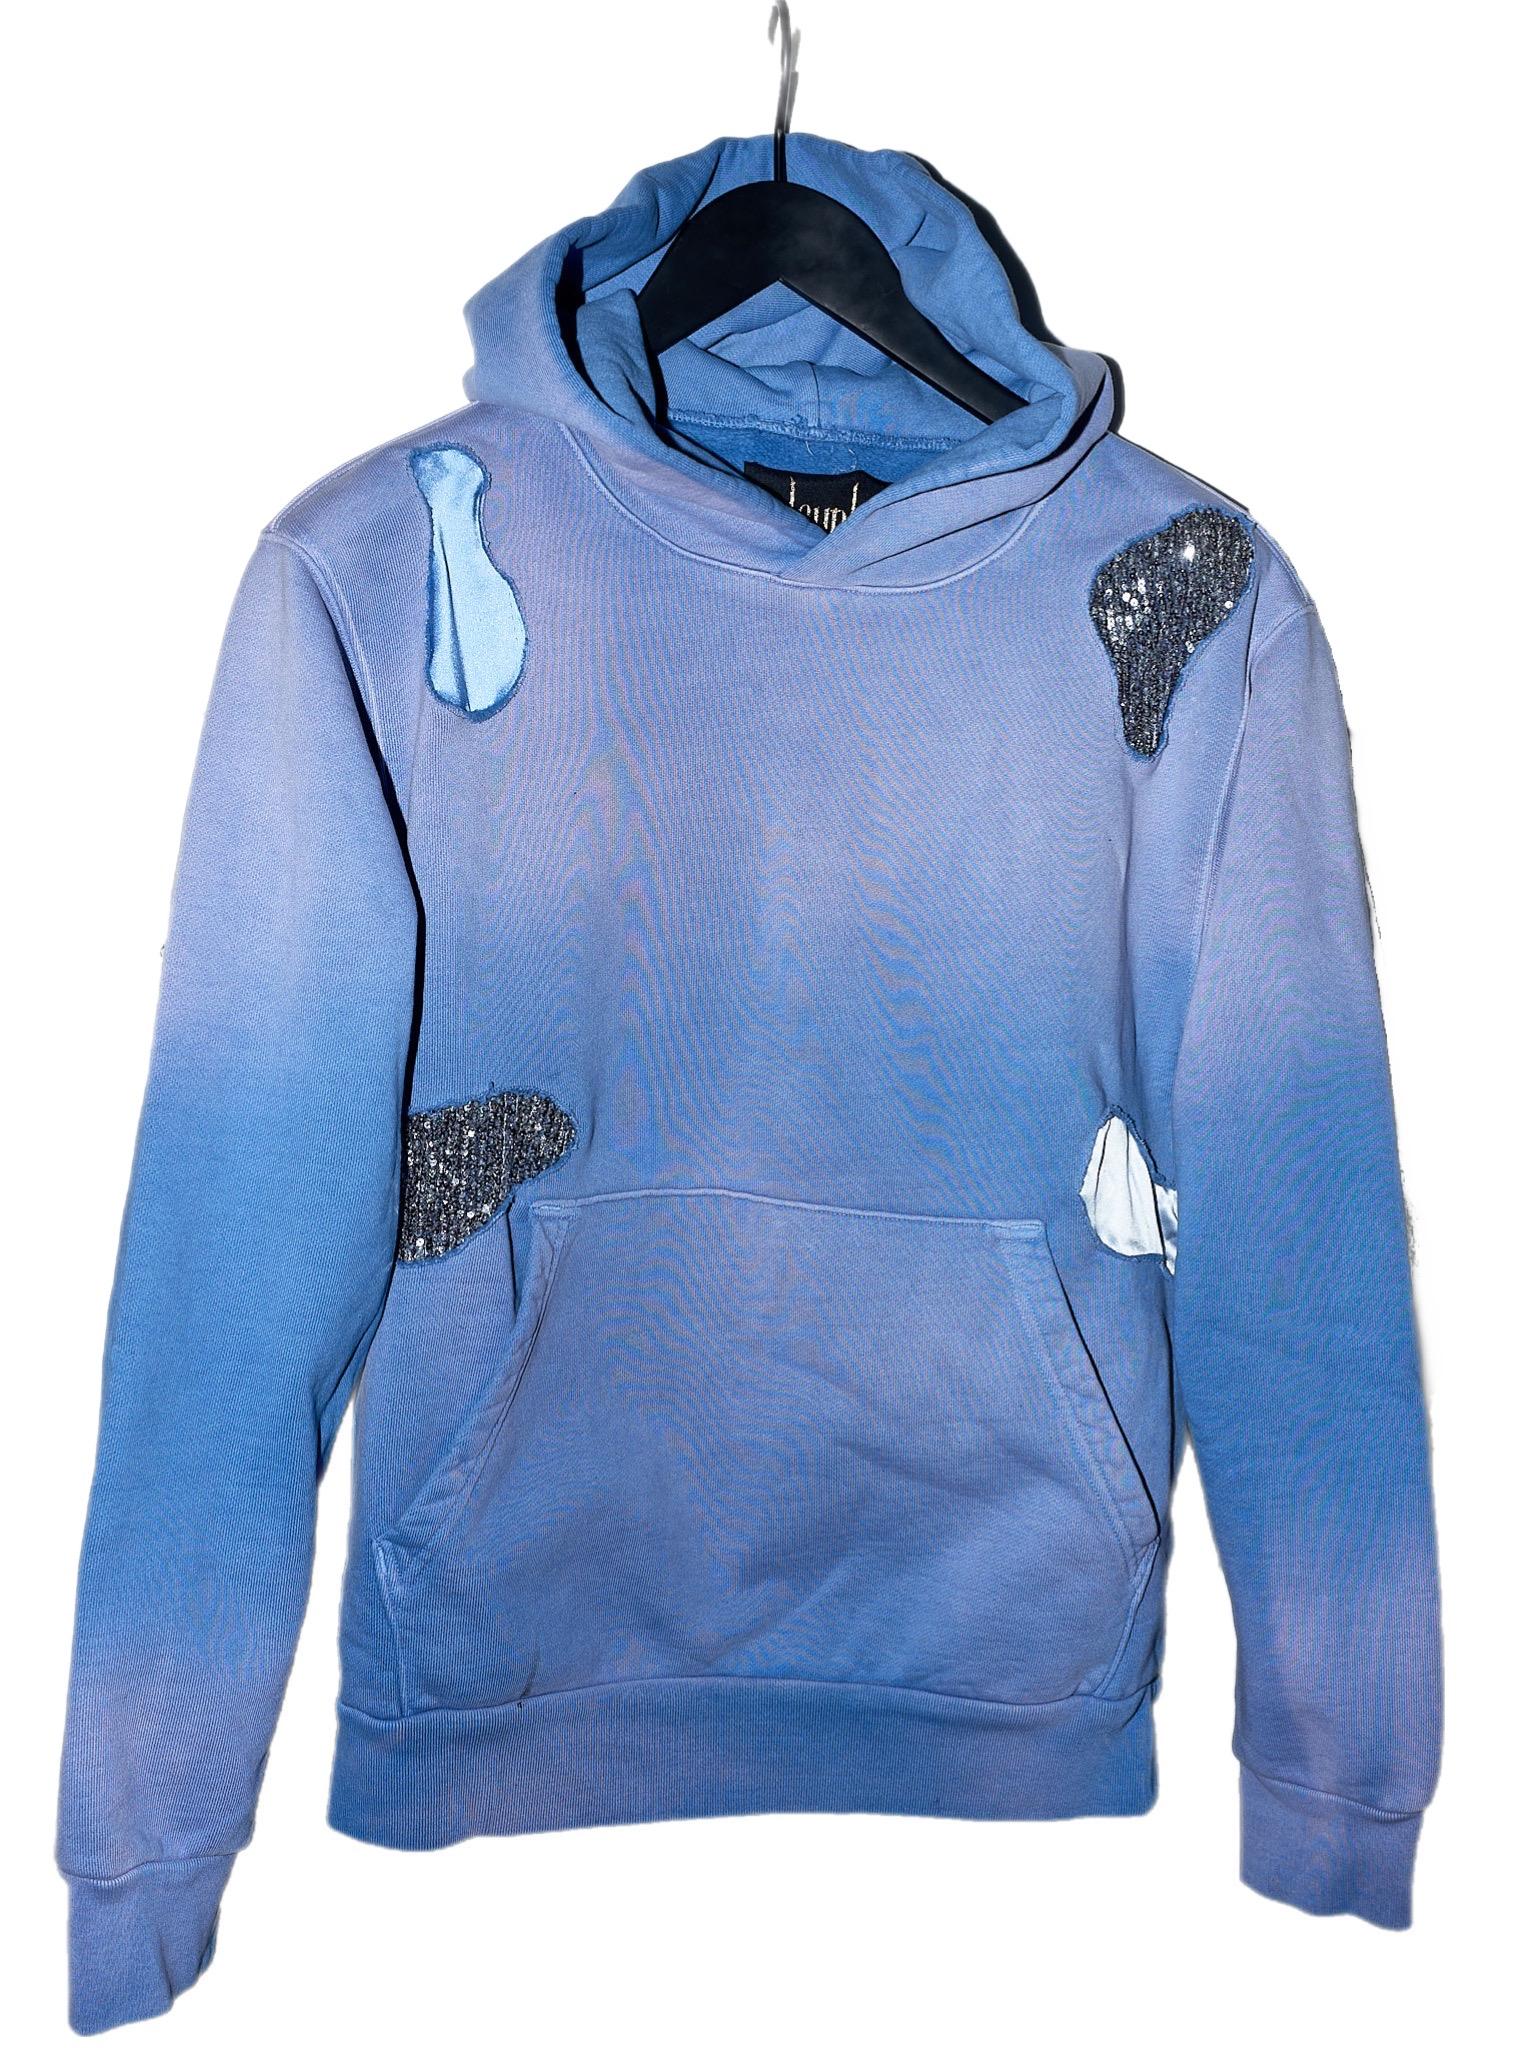 Brand: J Dauphin
Patchwork Hoodie Sweatshirt Silver Sequin Light Blue Silk 
Material: 100% Organic Cotton 

Available in Size Medium

Express a hybrid of easy-luxe and bourgeoisie jet-set look. Effortless and versatile, elegant and classy they bring